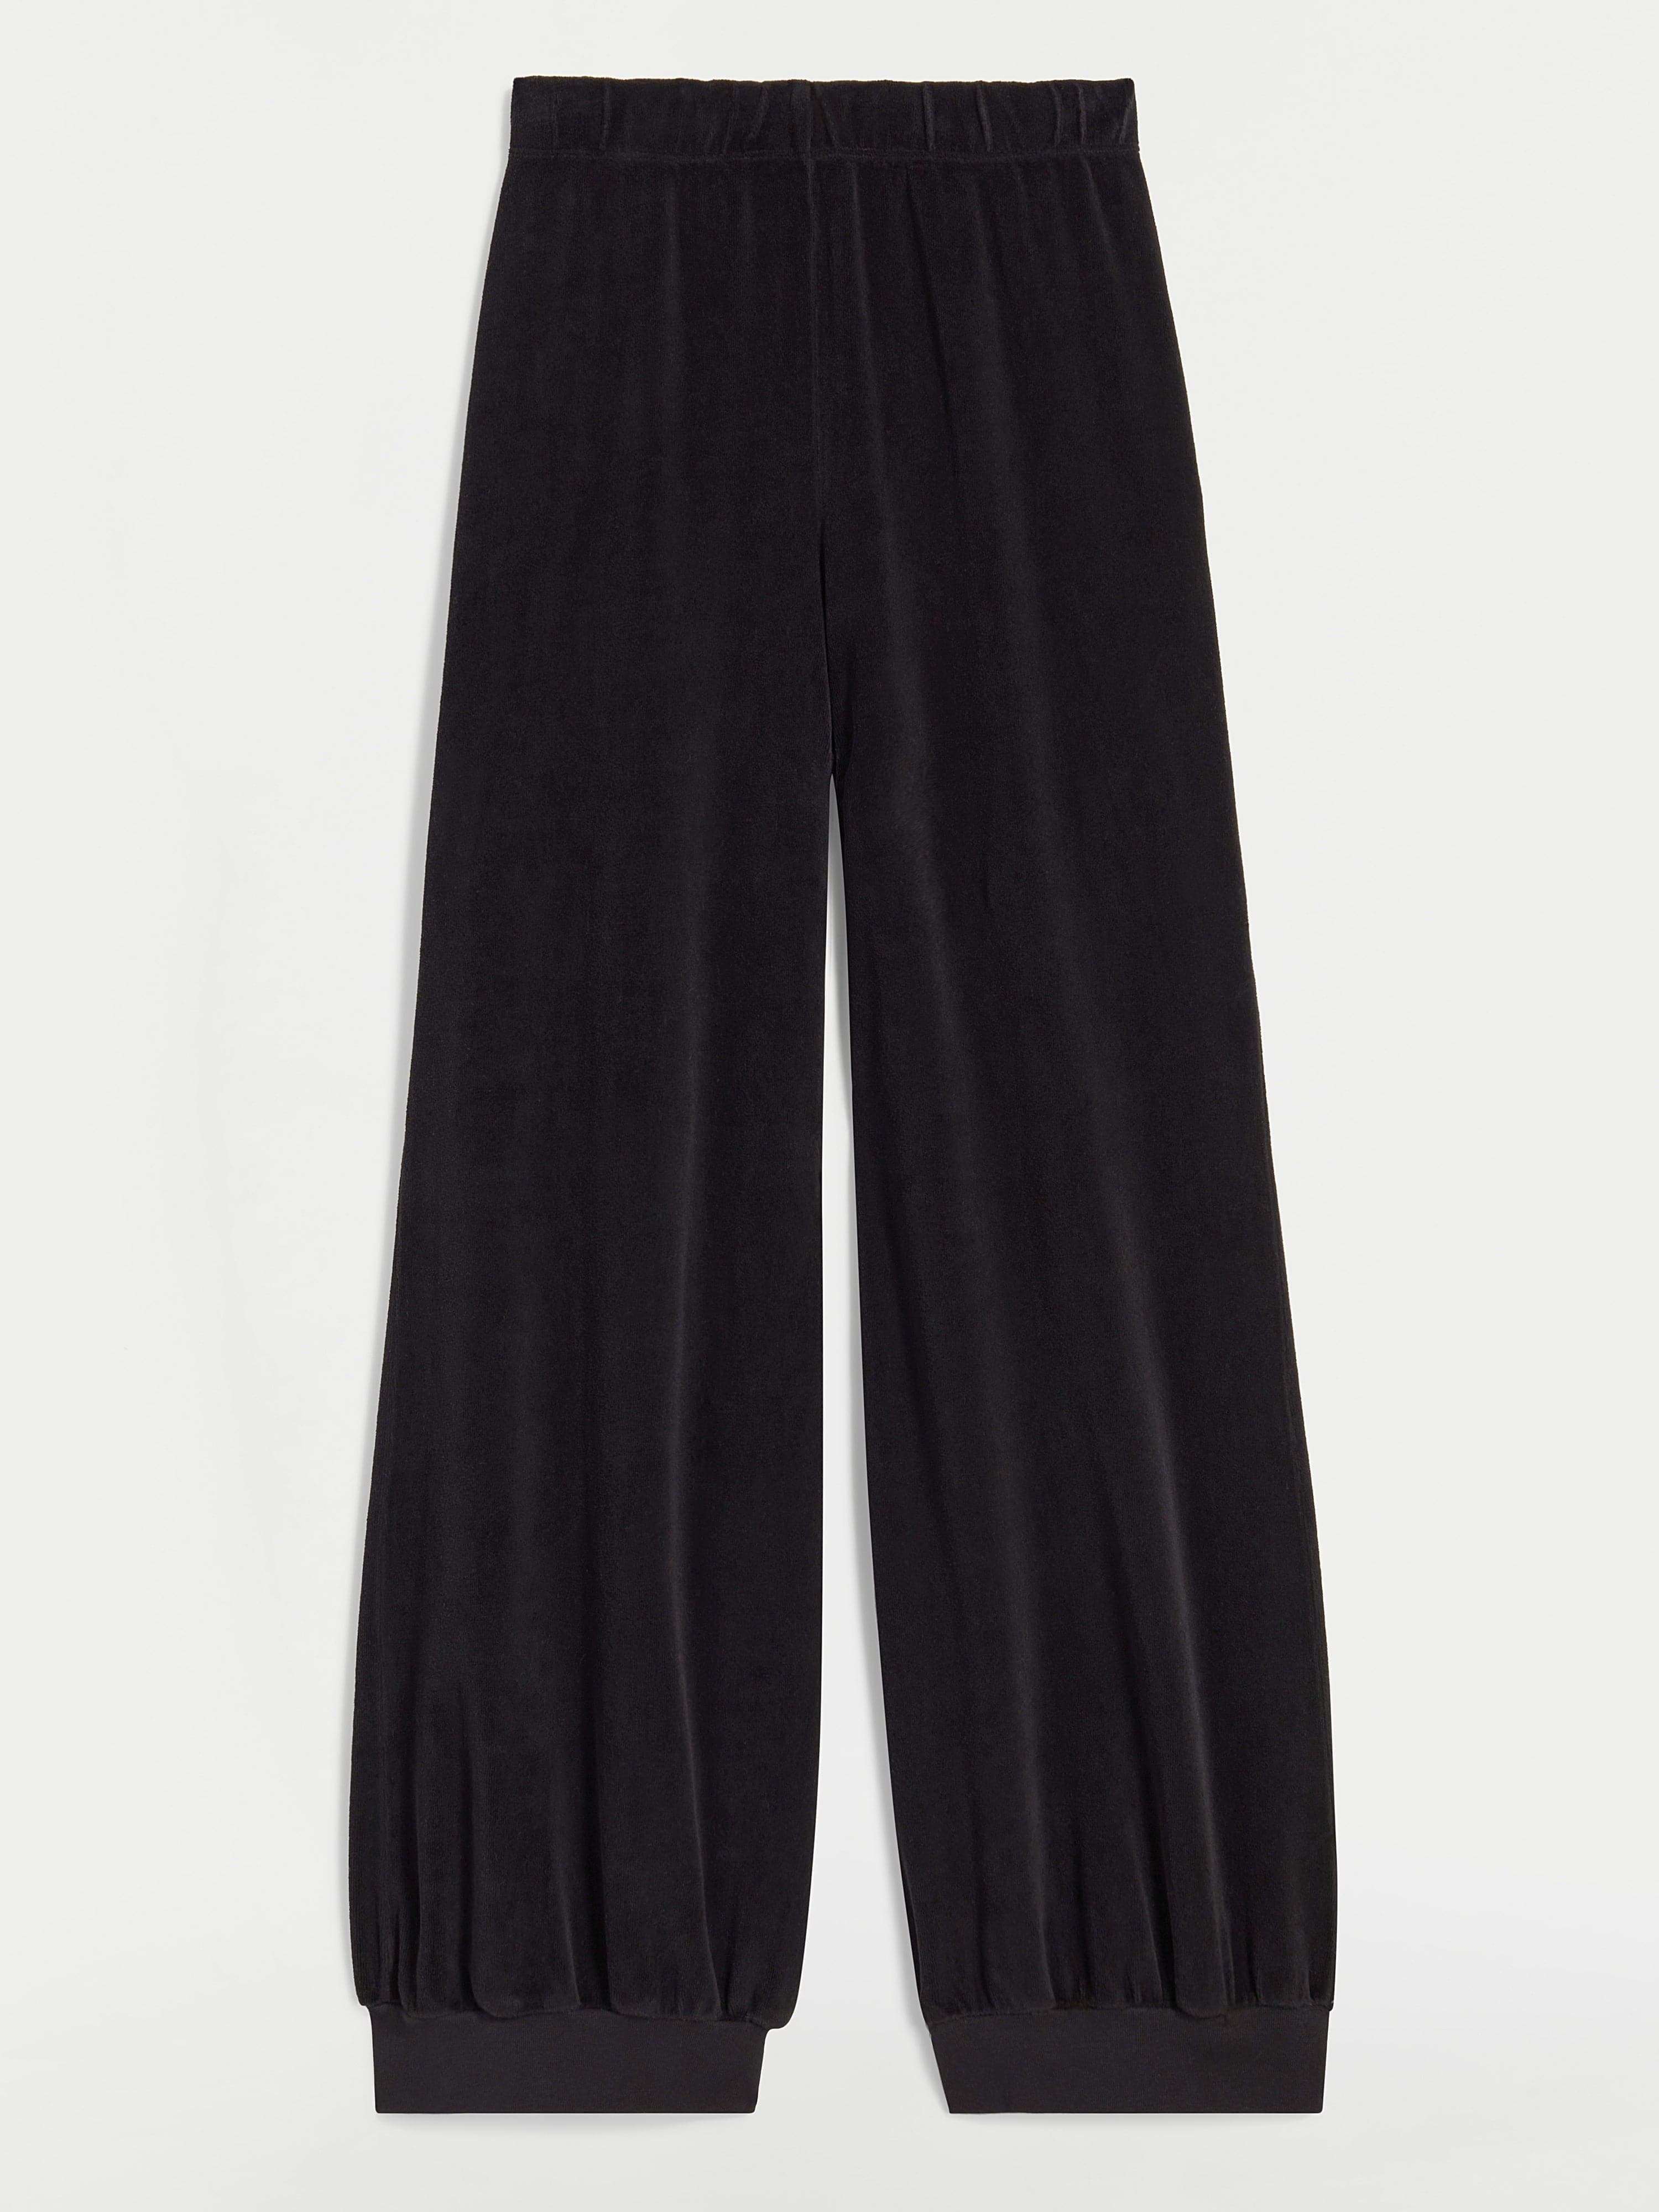 These $15 Harem Pants Have 800+ 5-Star  Reviews